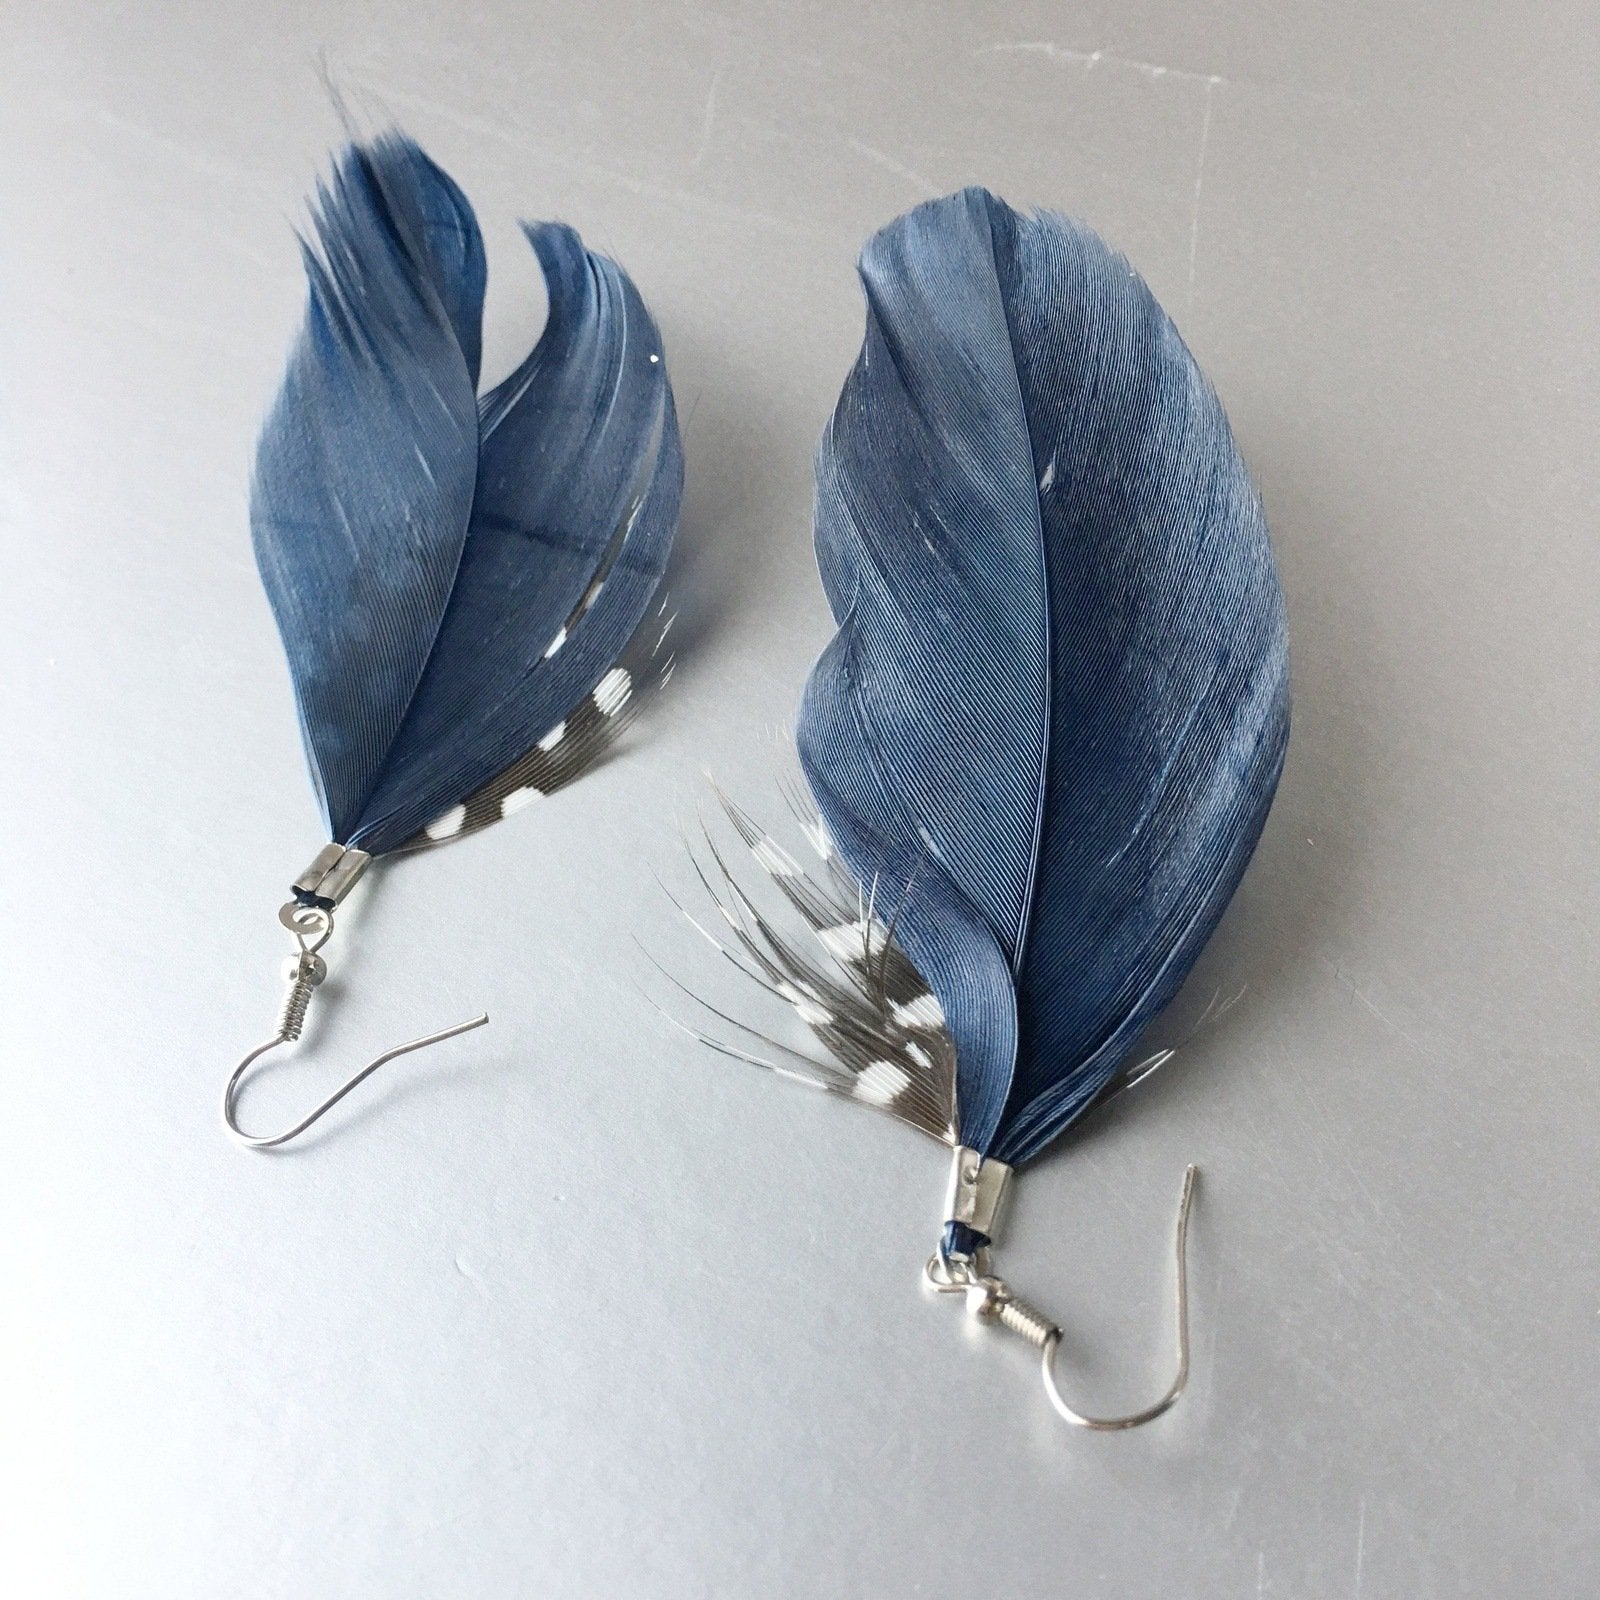 Natural Bird Feather Dangle Earrings Contemporary Jewelry